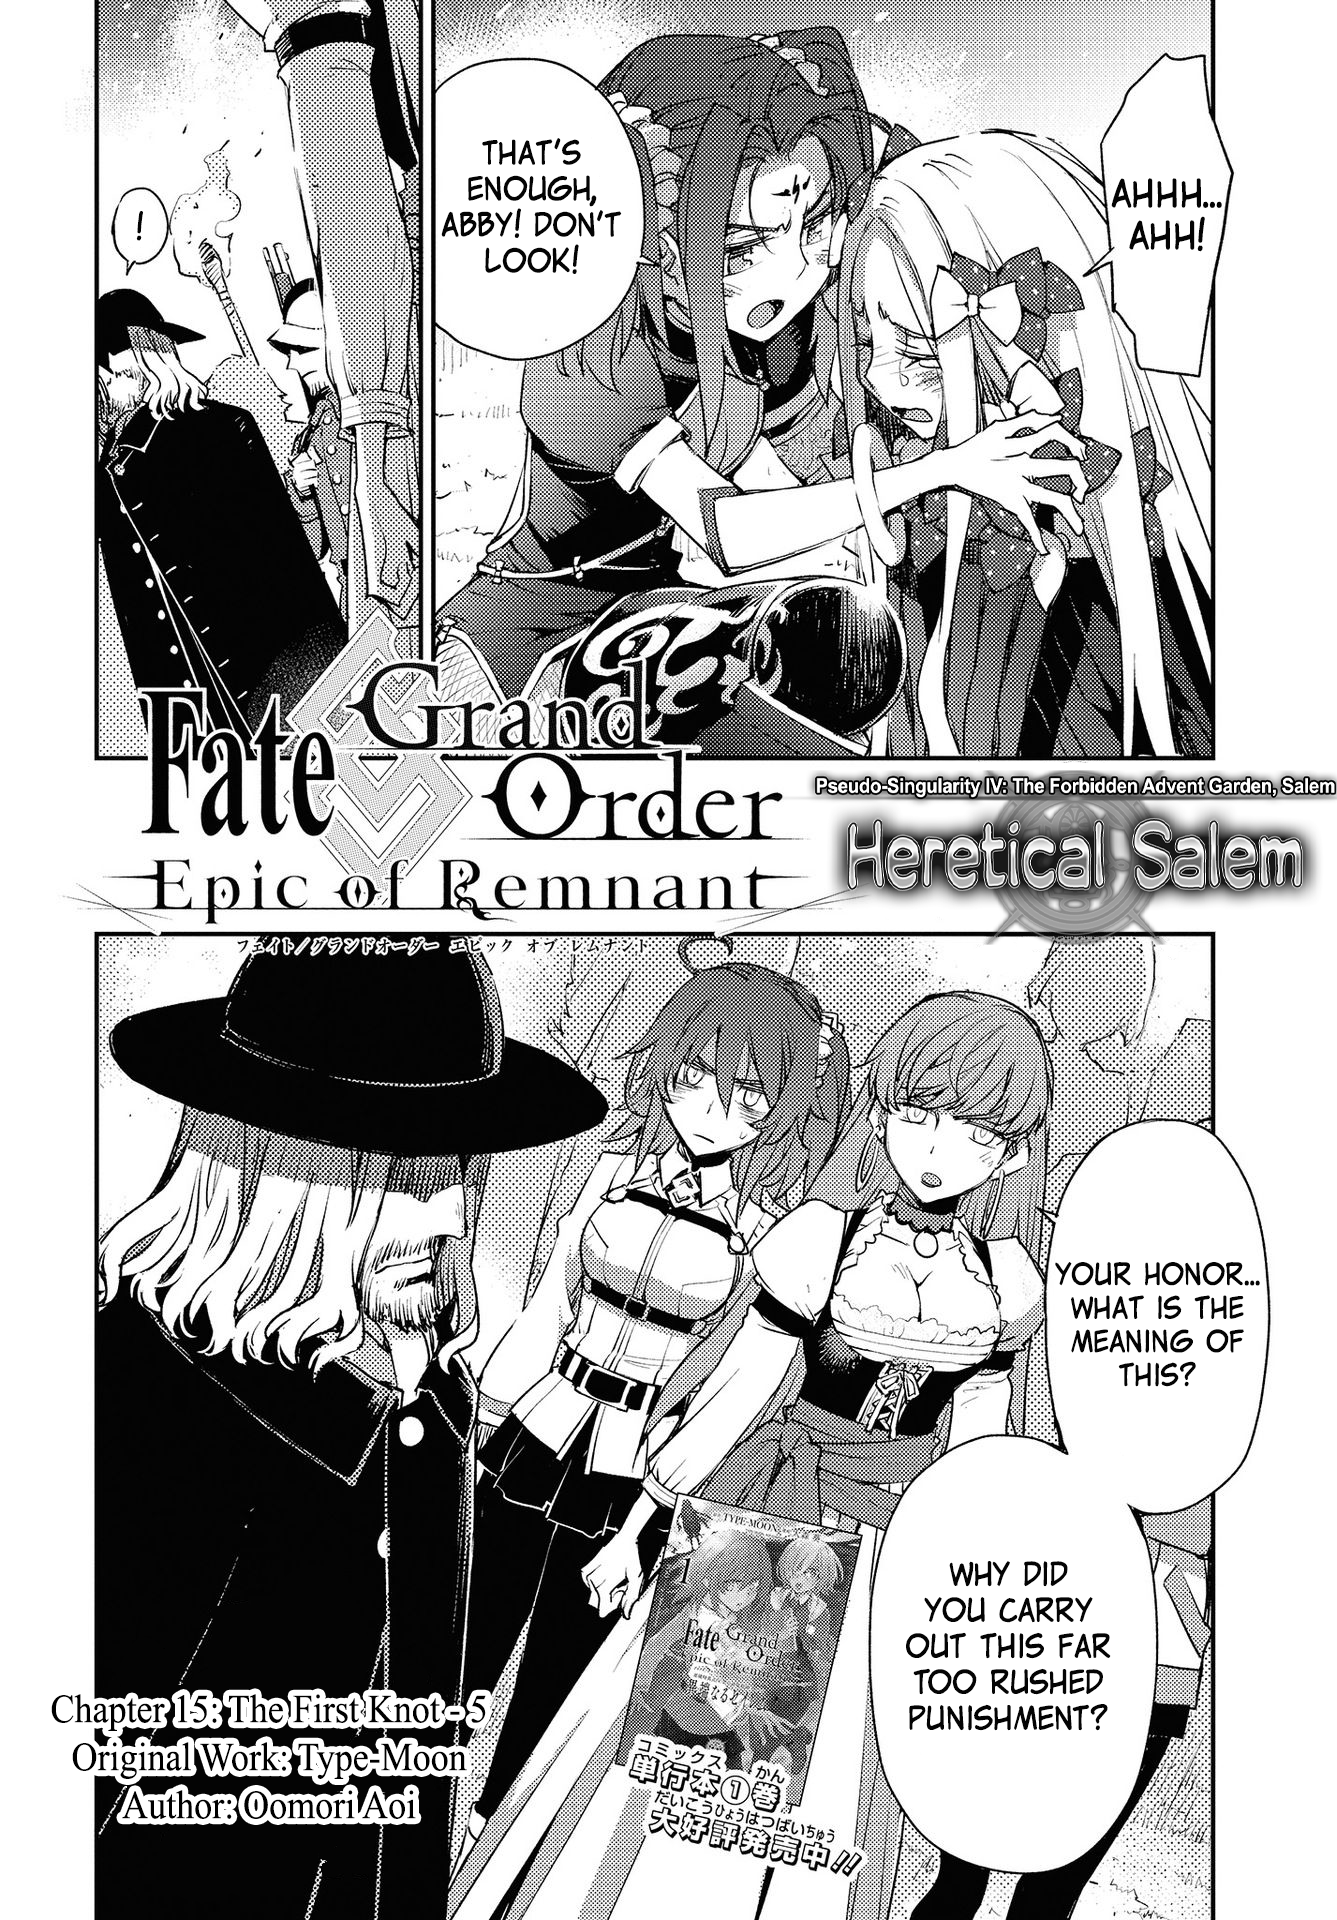 Fate/grand Order: Epic Of Remnant: Pseudo-Singularity Iv: The Forbidden Advent Garden, Salem - Heretical Salem Chapter 15: The First Knot - 5 - Picture 2